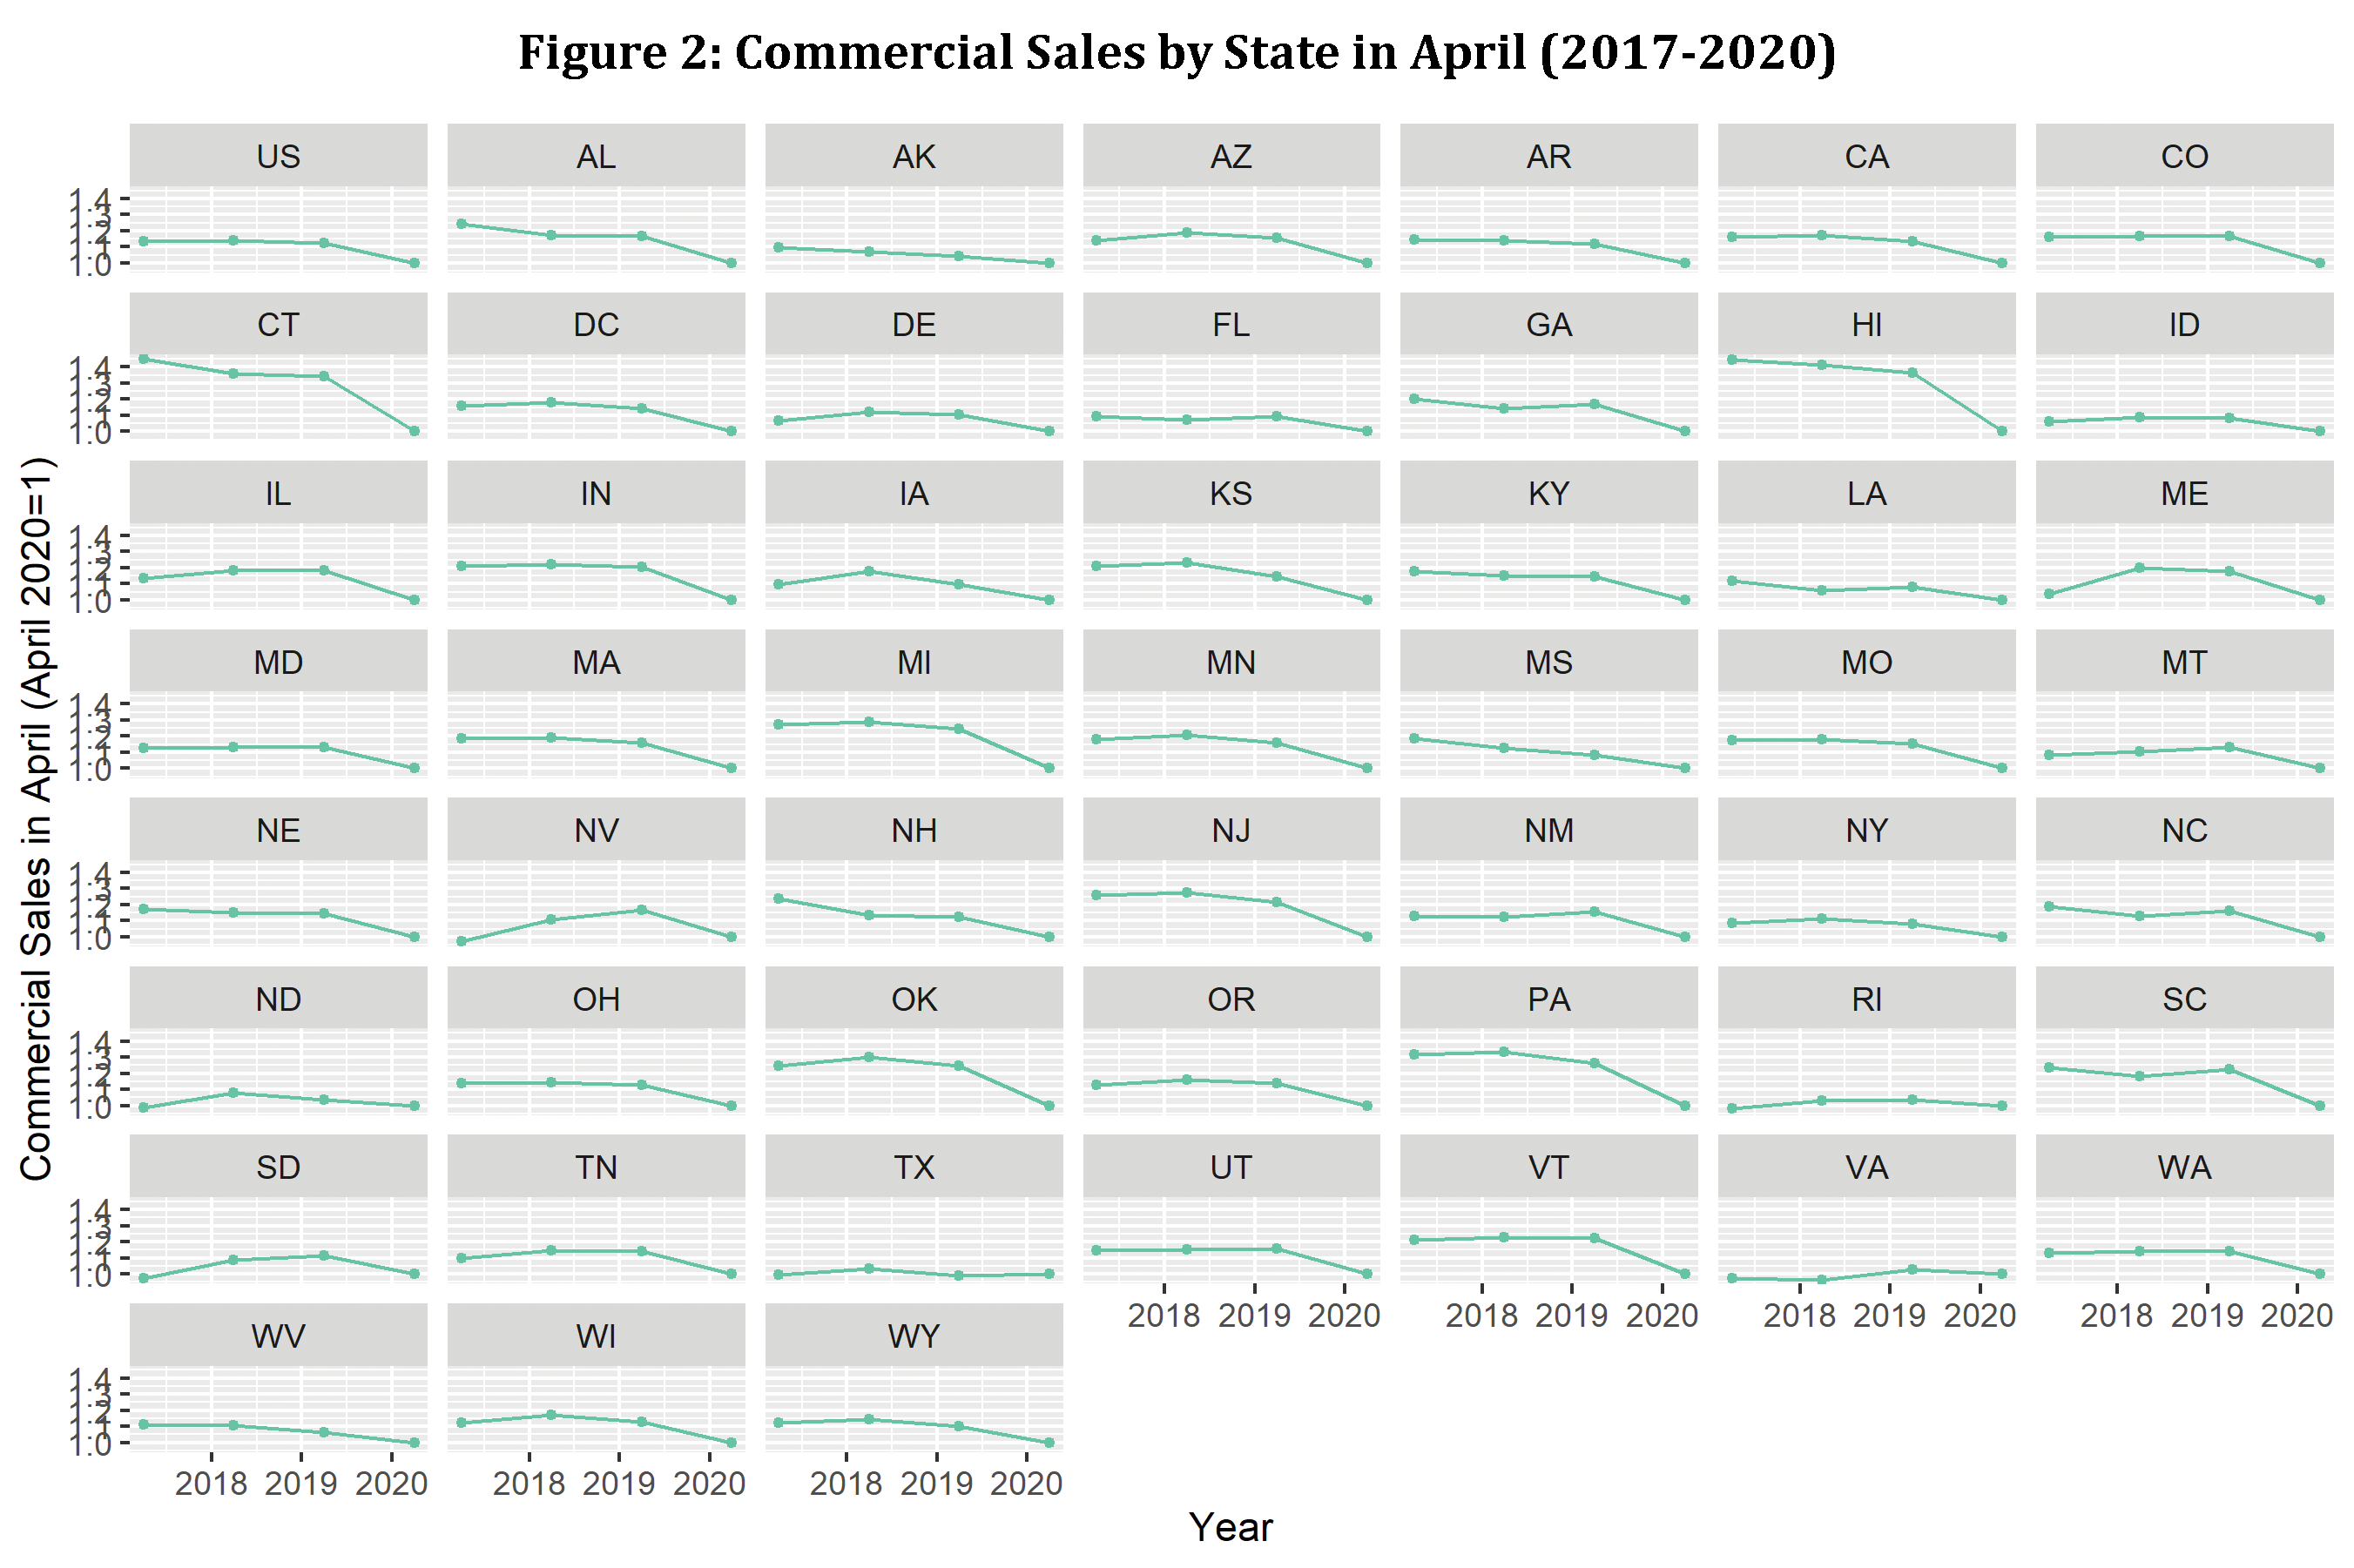 Utility Commercial Sales by State